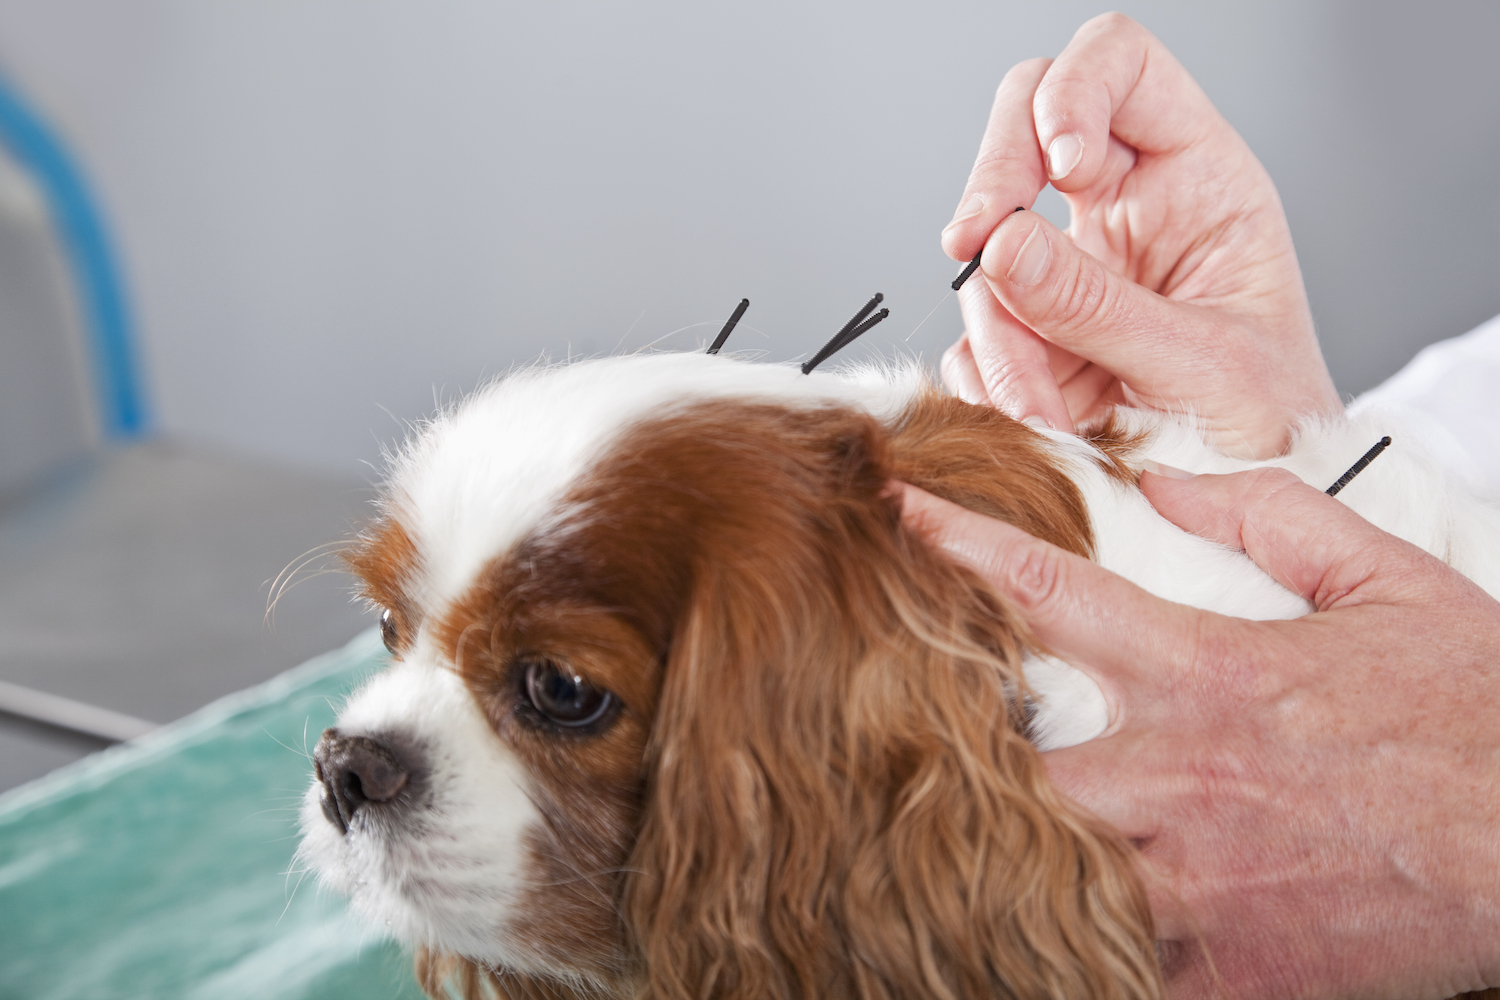 Vet treating dog with acupuncture